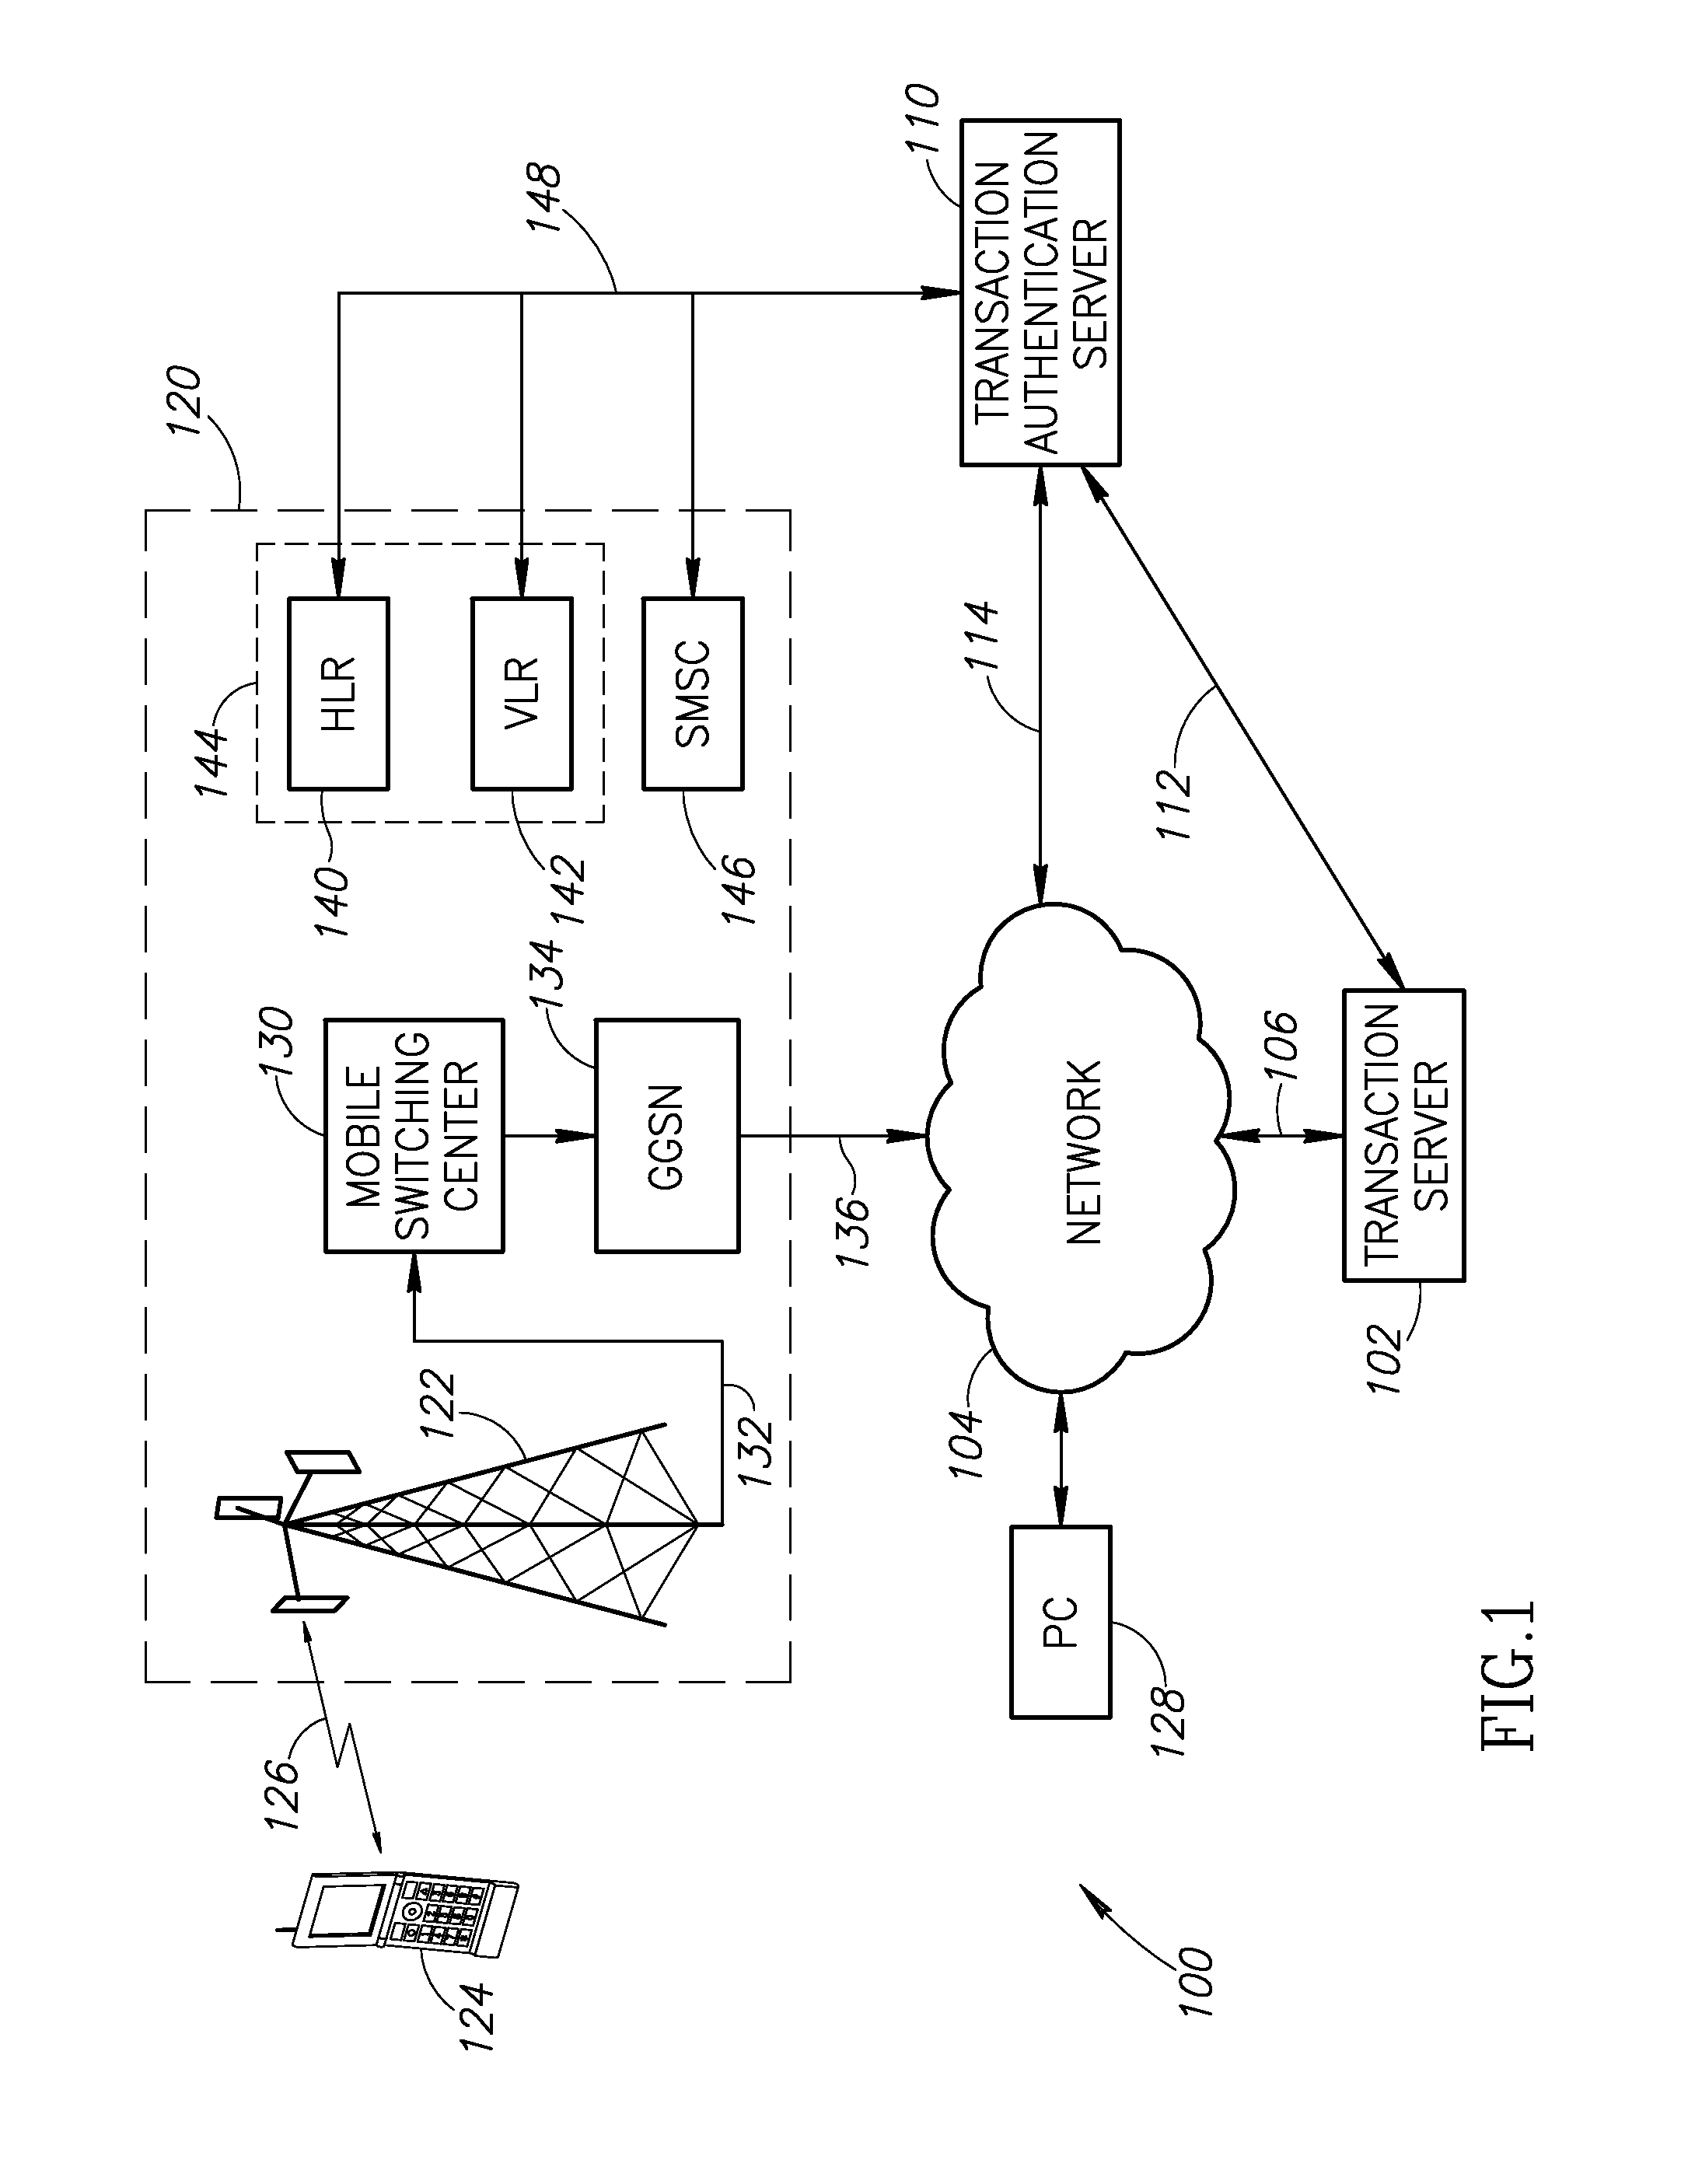 System and method for transaction authentication using a mobile communication device